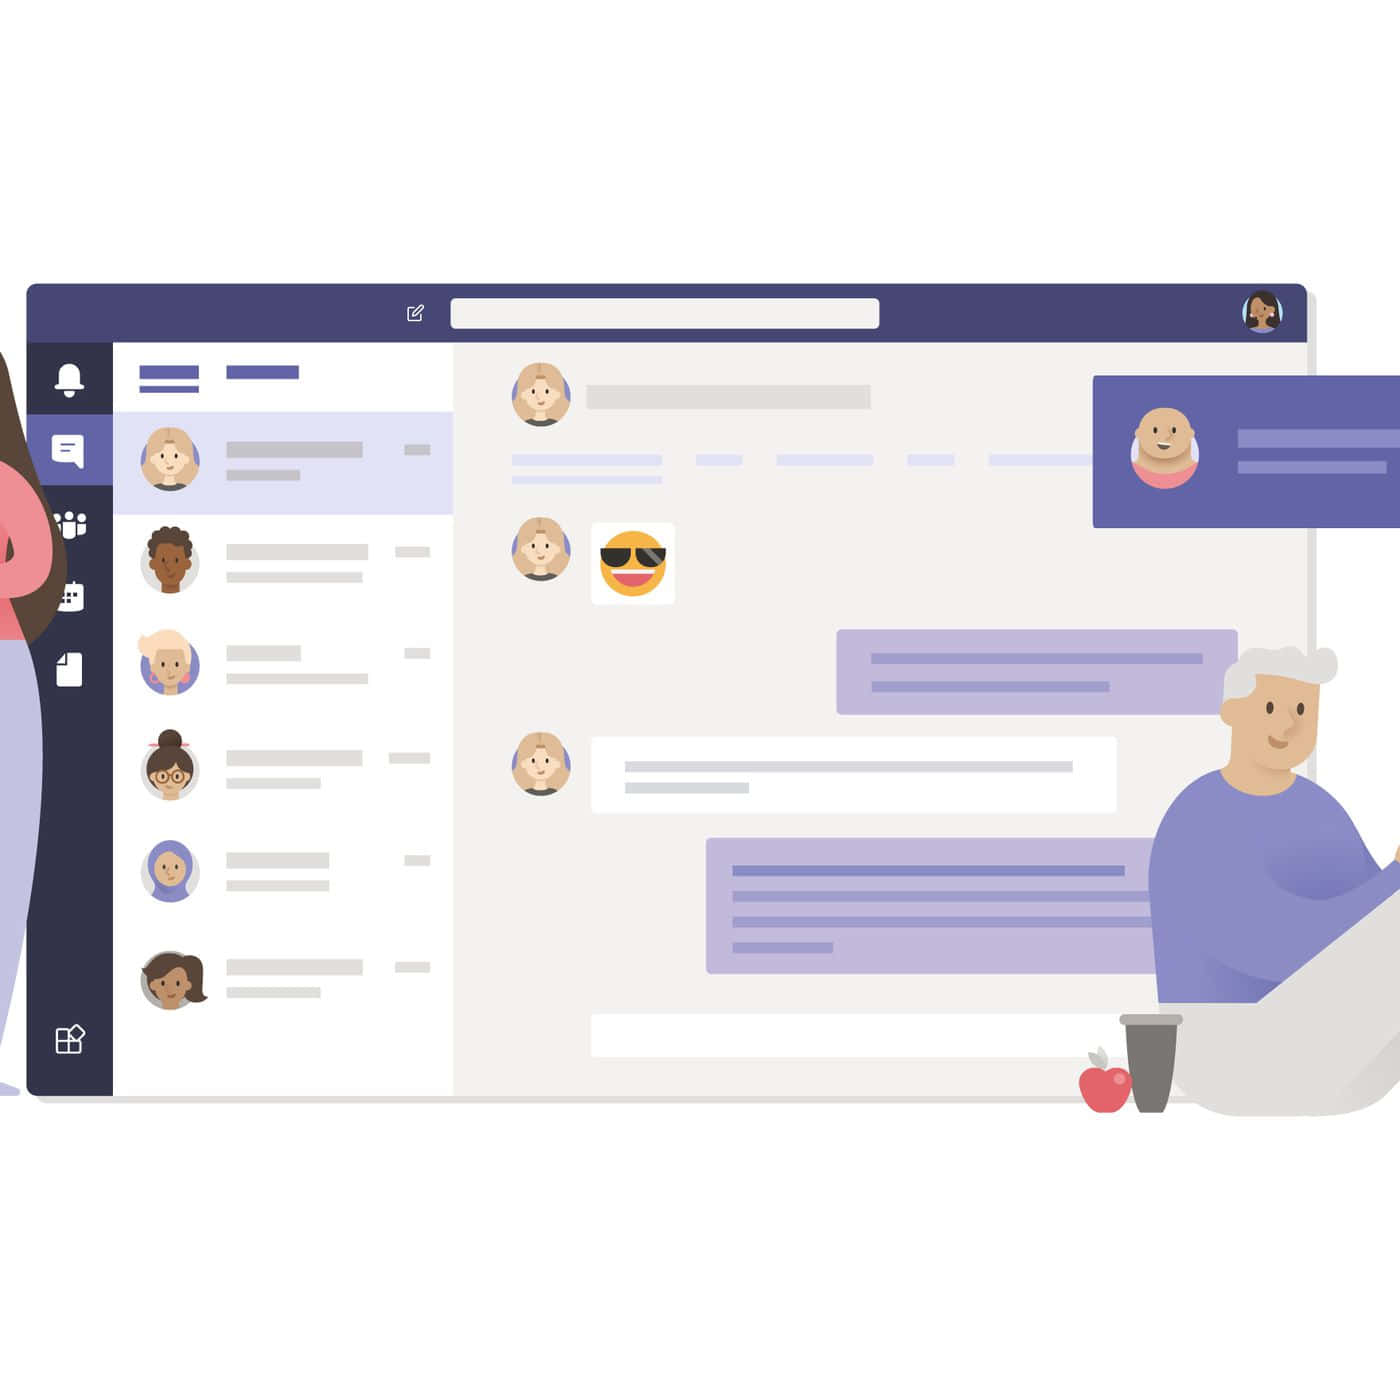 Find your new teams in Microsoft Teams